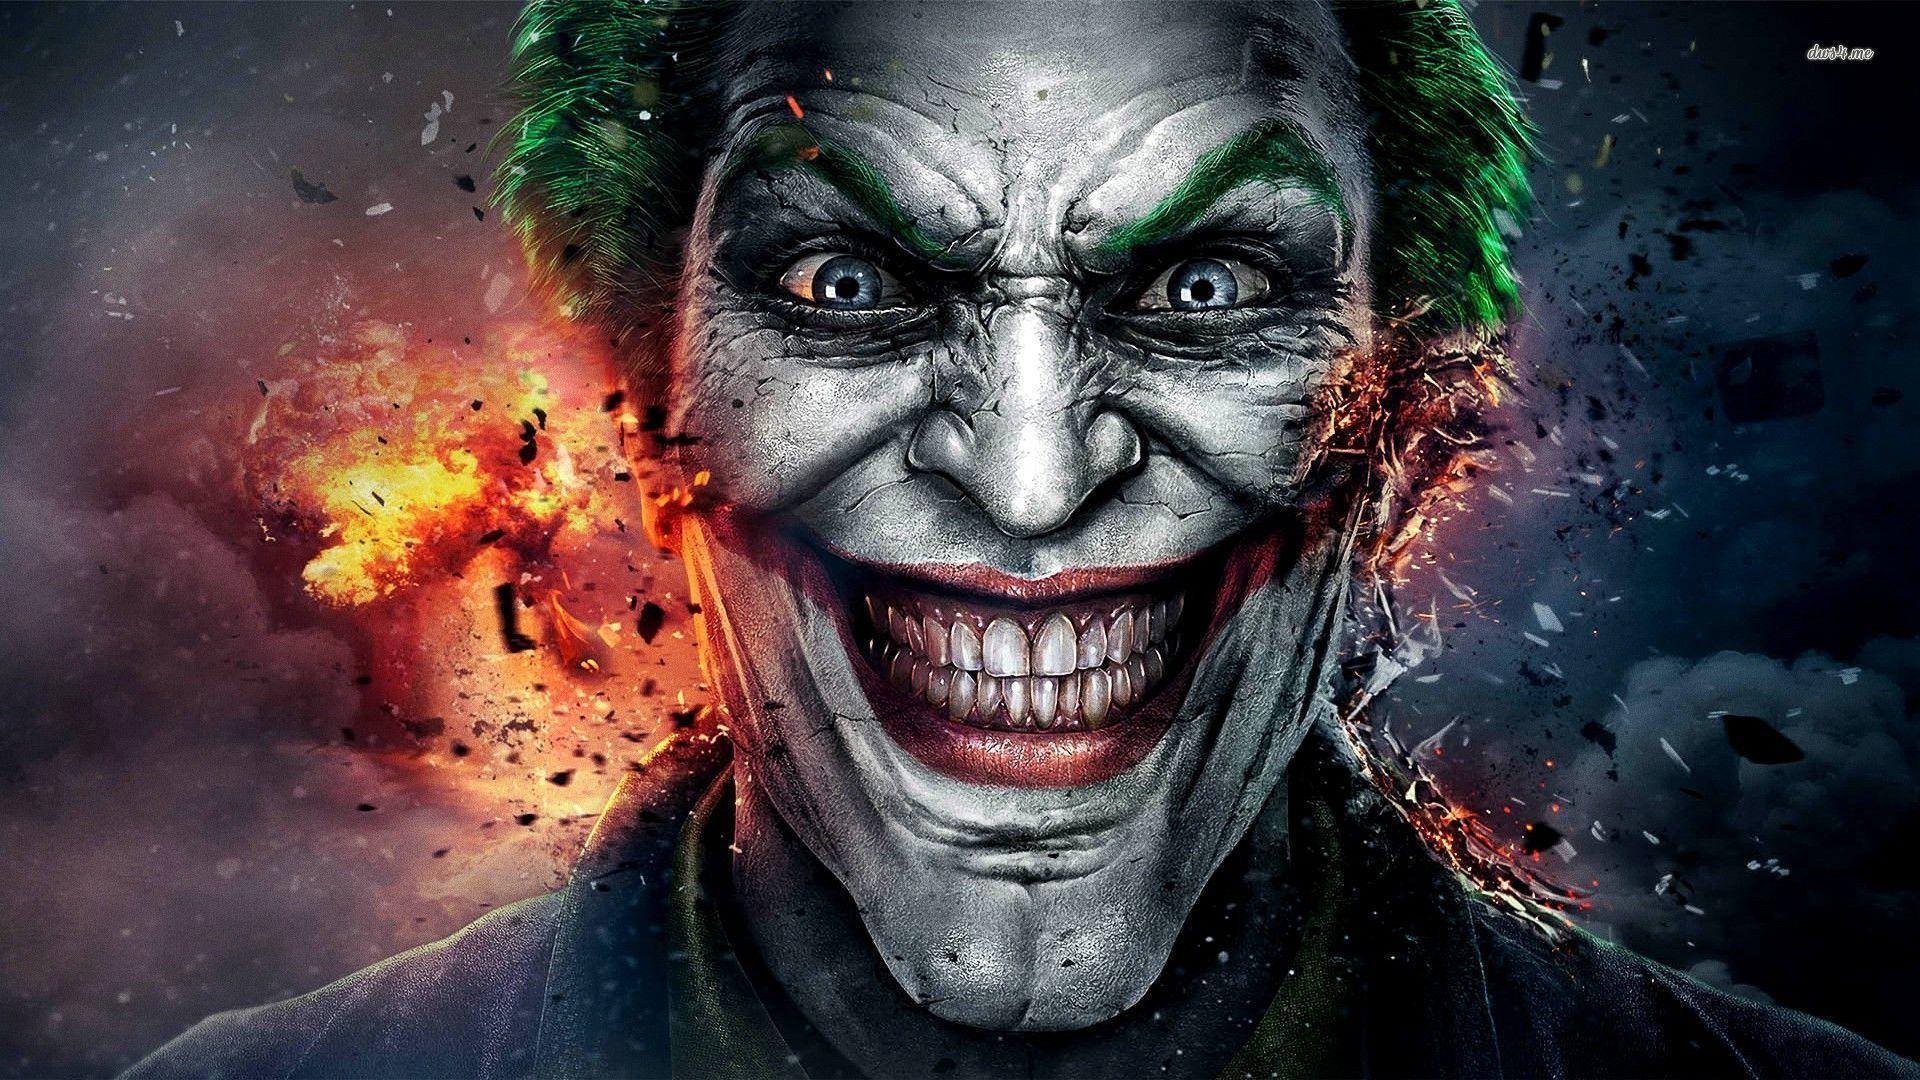 Joker Wallpapers in HQ Resolution, 47, B.SCB Wallpapers